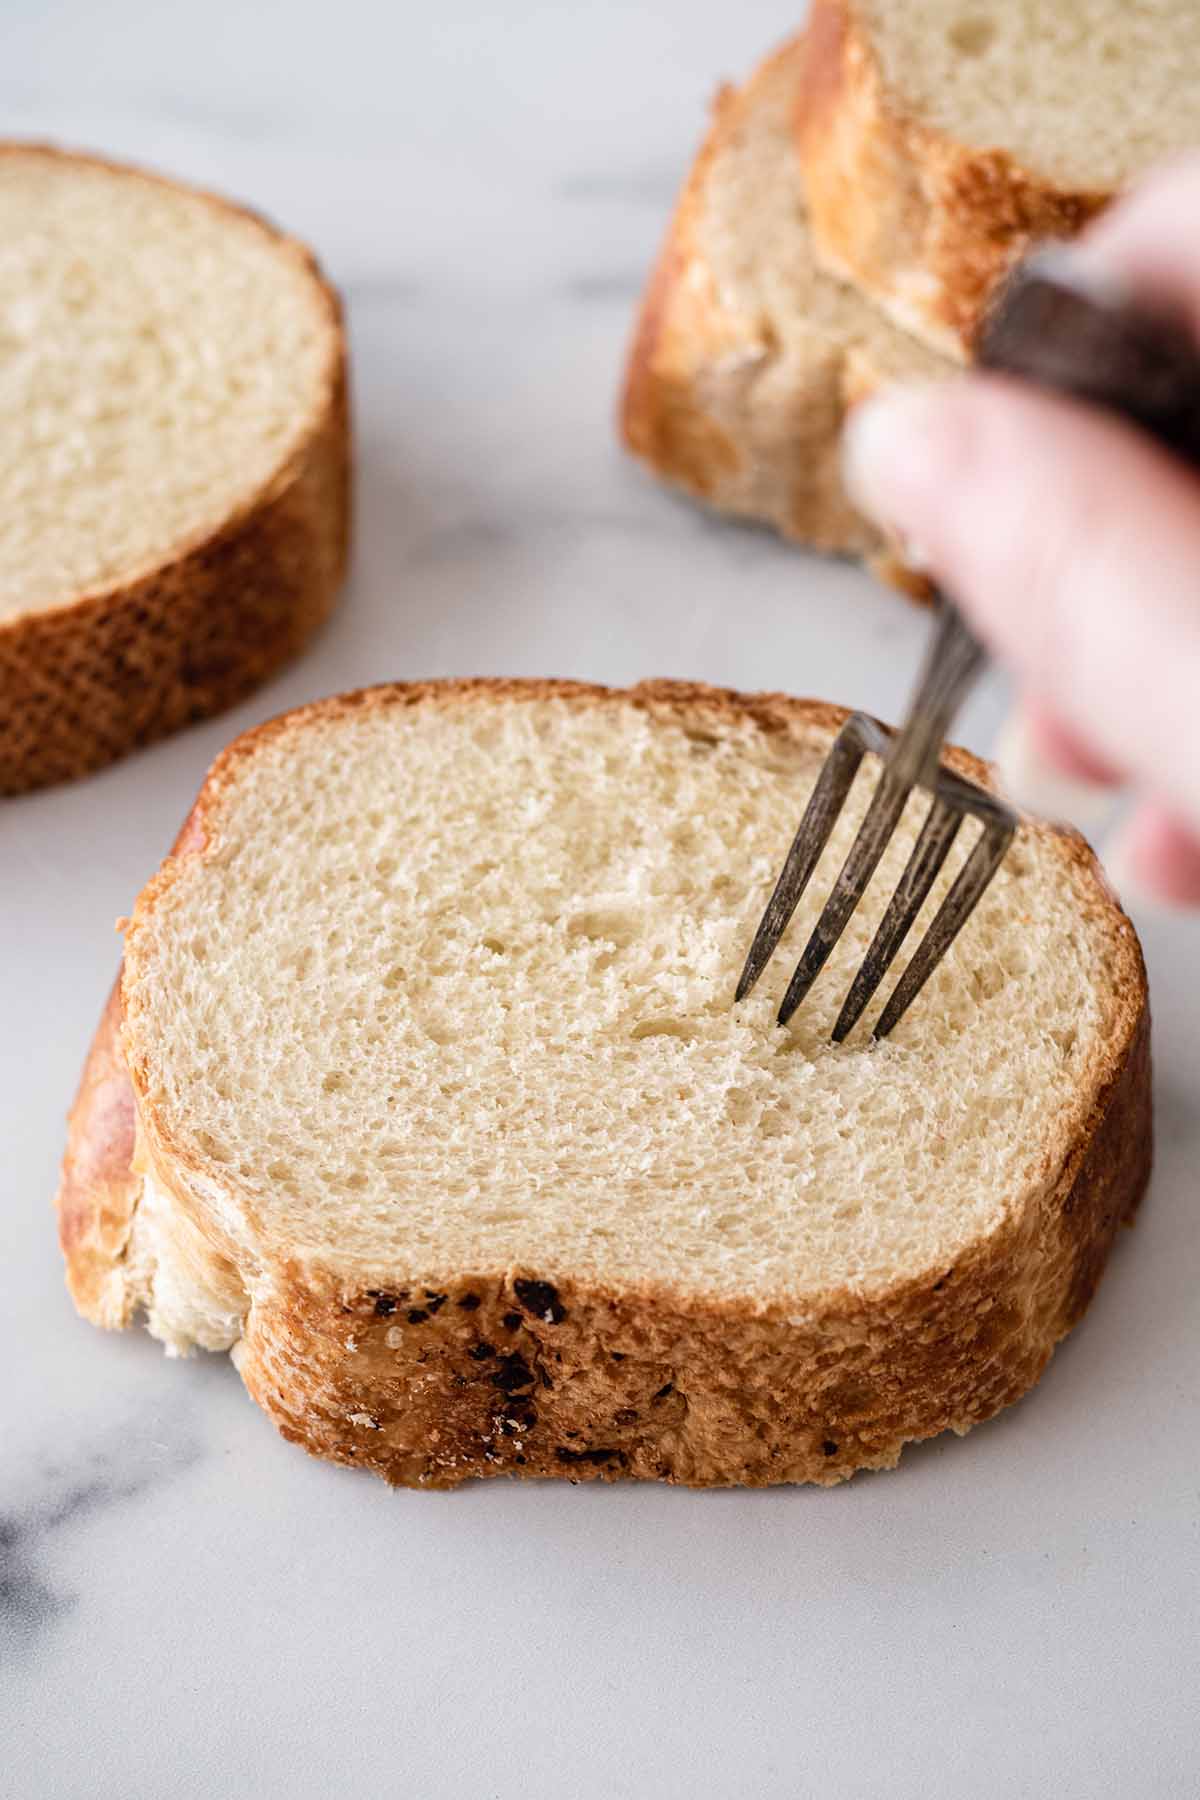 Fork poking a slice of bread.